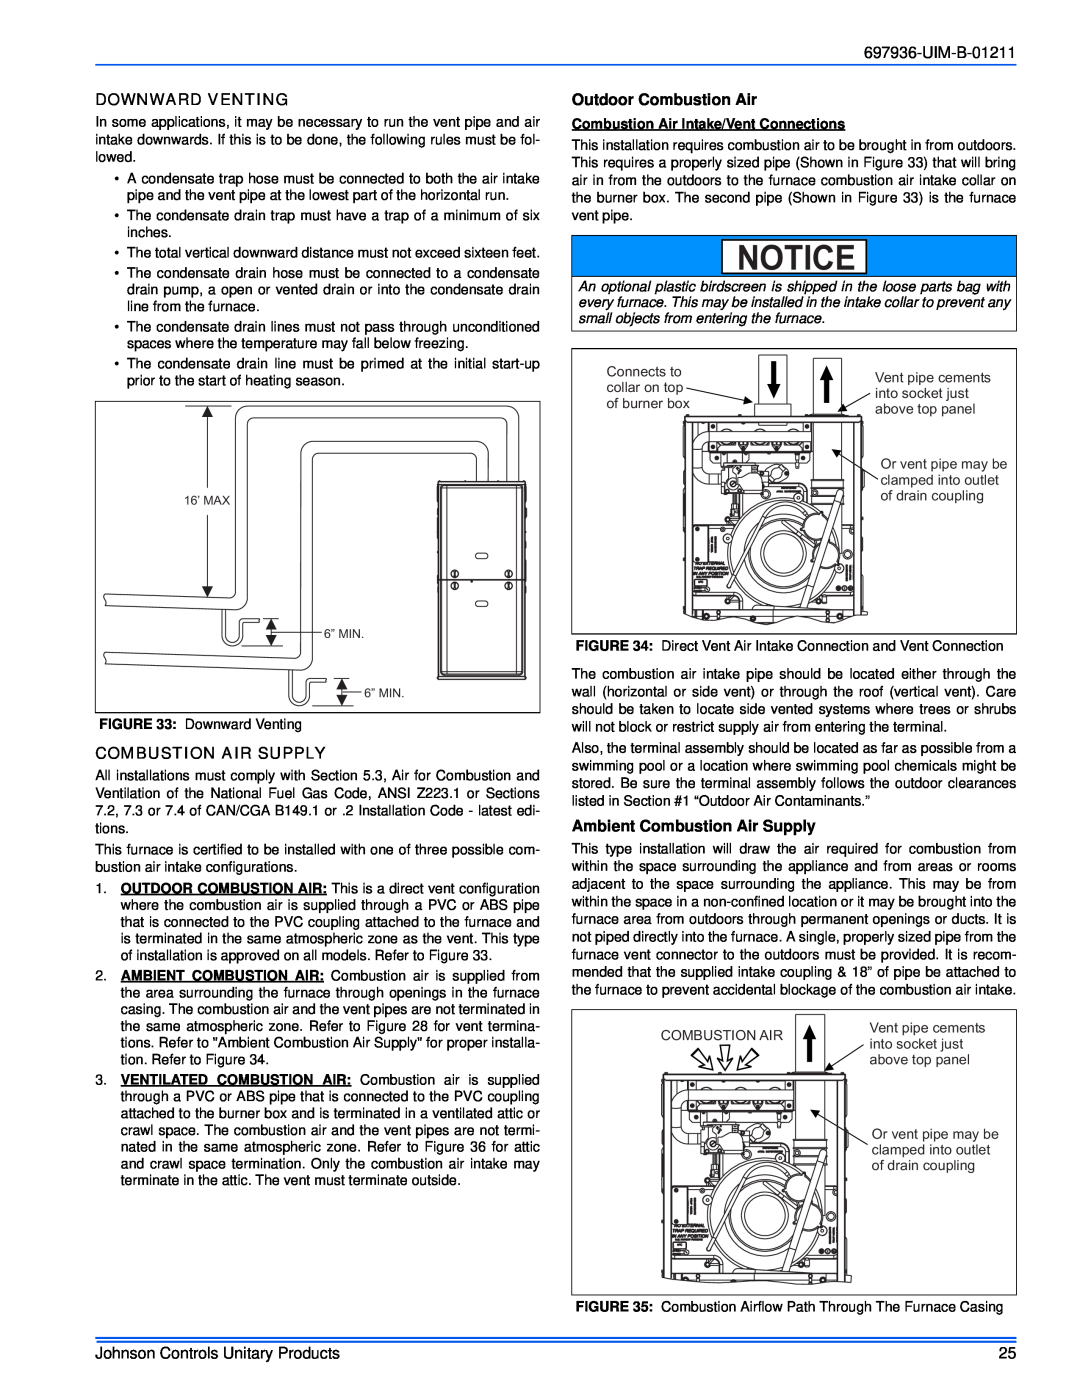 Johnson Controls TM9X*MP installation manual UIM-B-01211, Downward Venting, Outdoor Combustion Air, Combustion Air Supply 